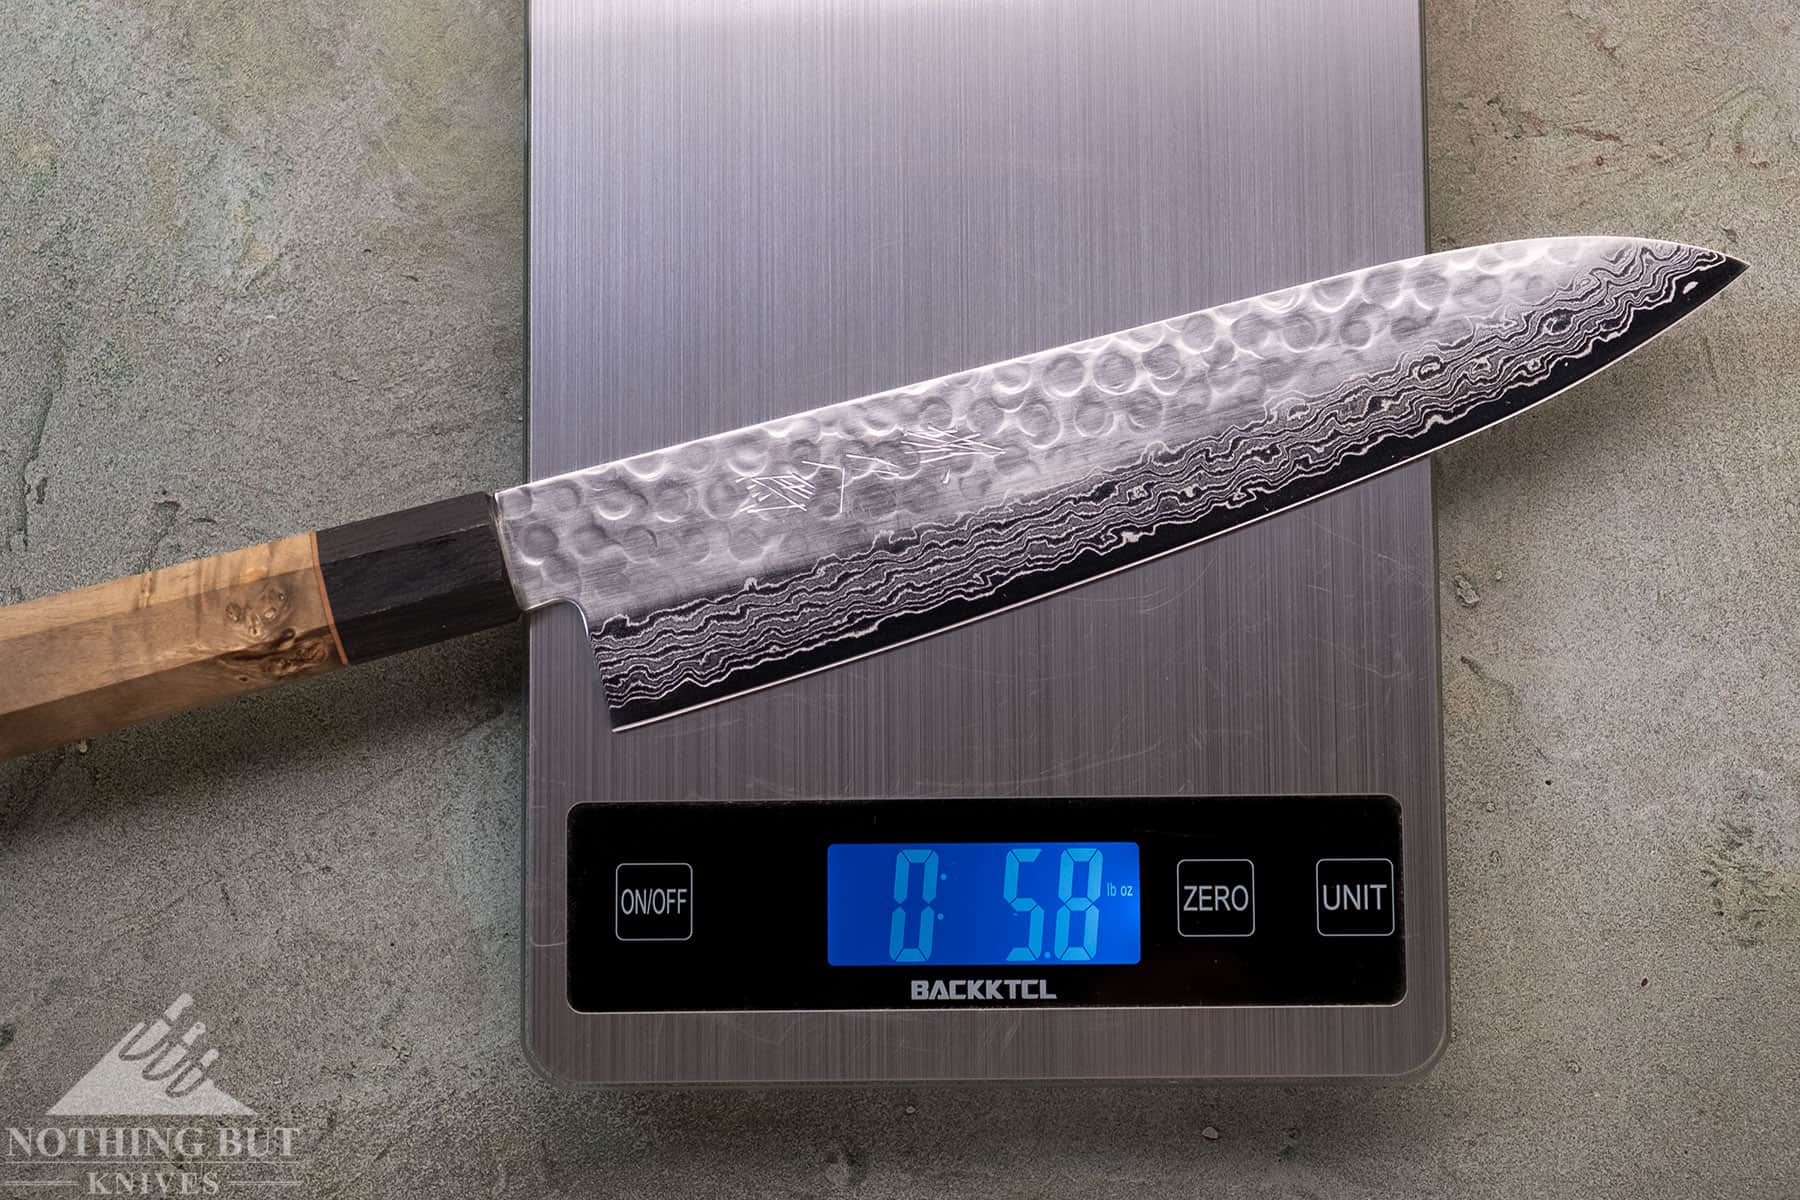 All Oishya chef knives are lightweight. 